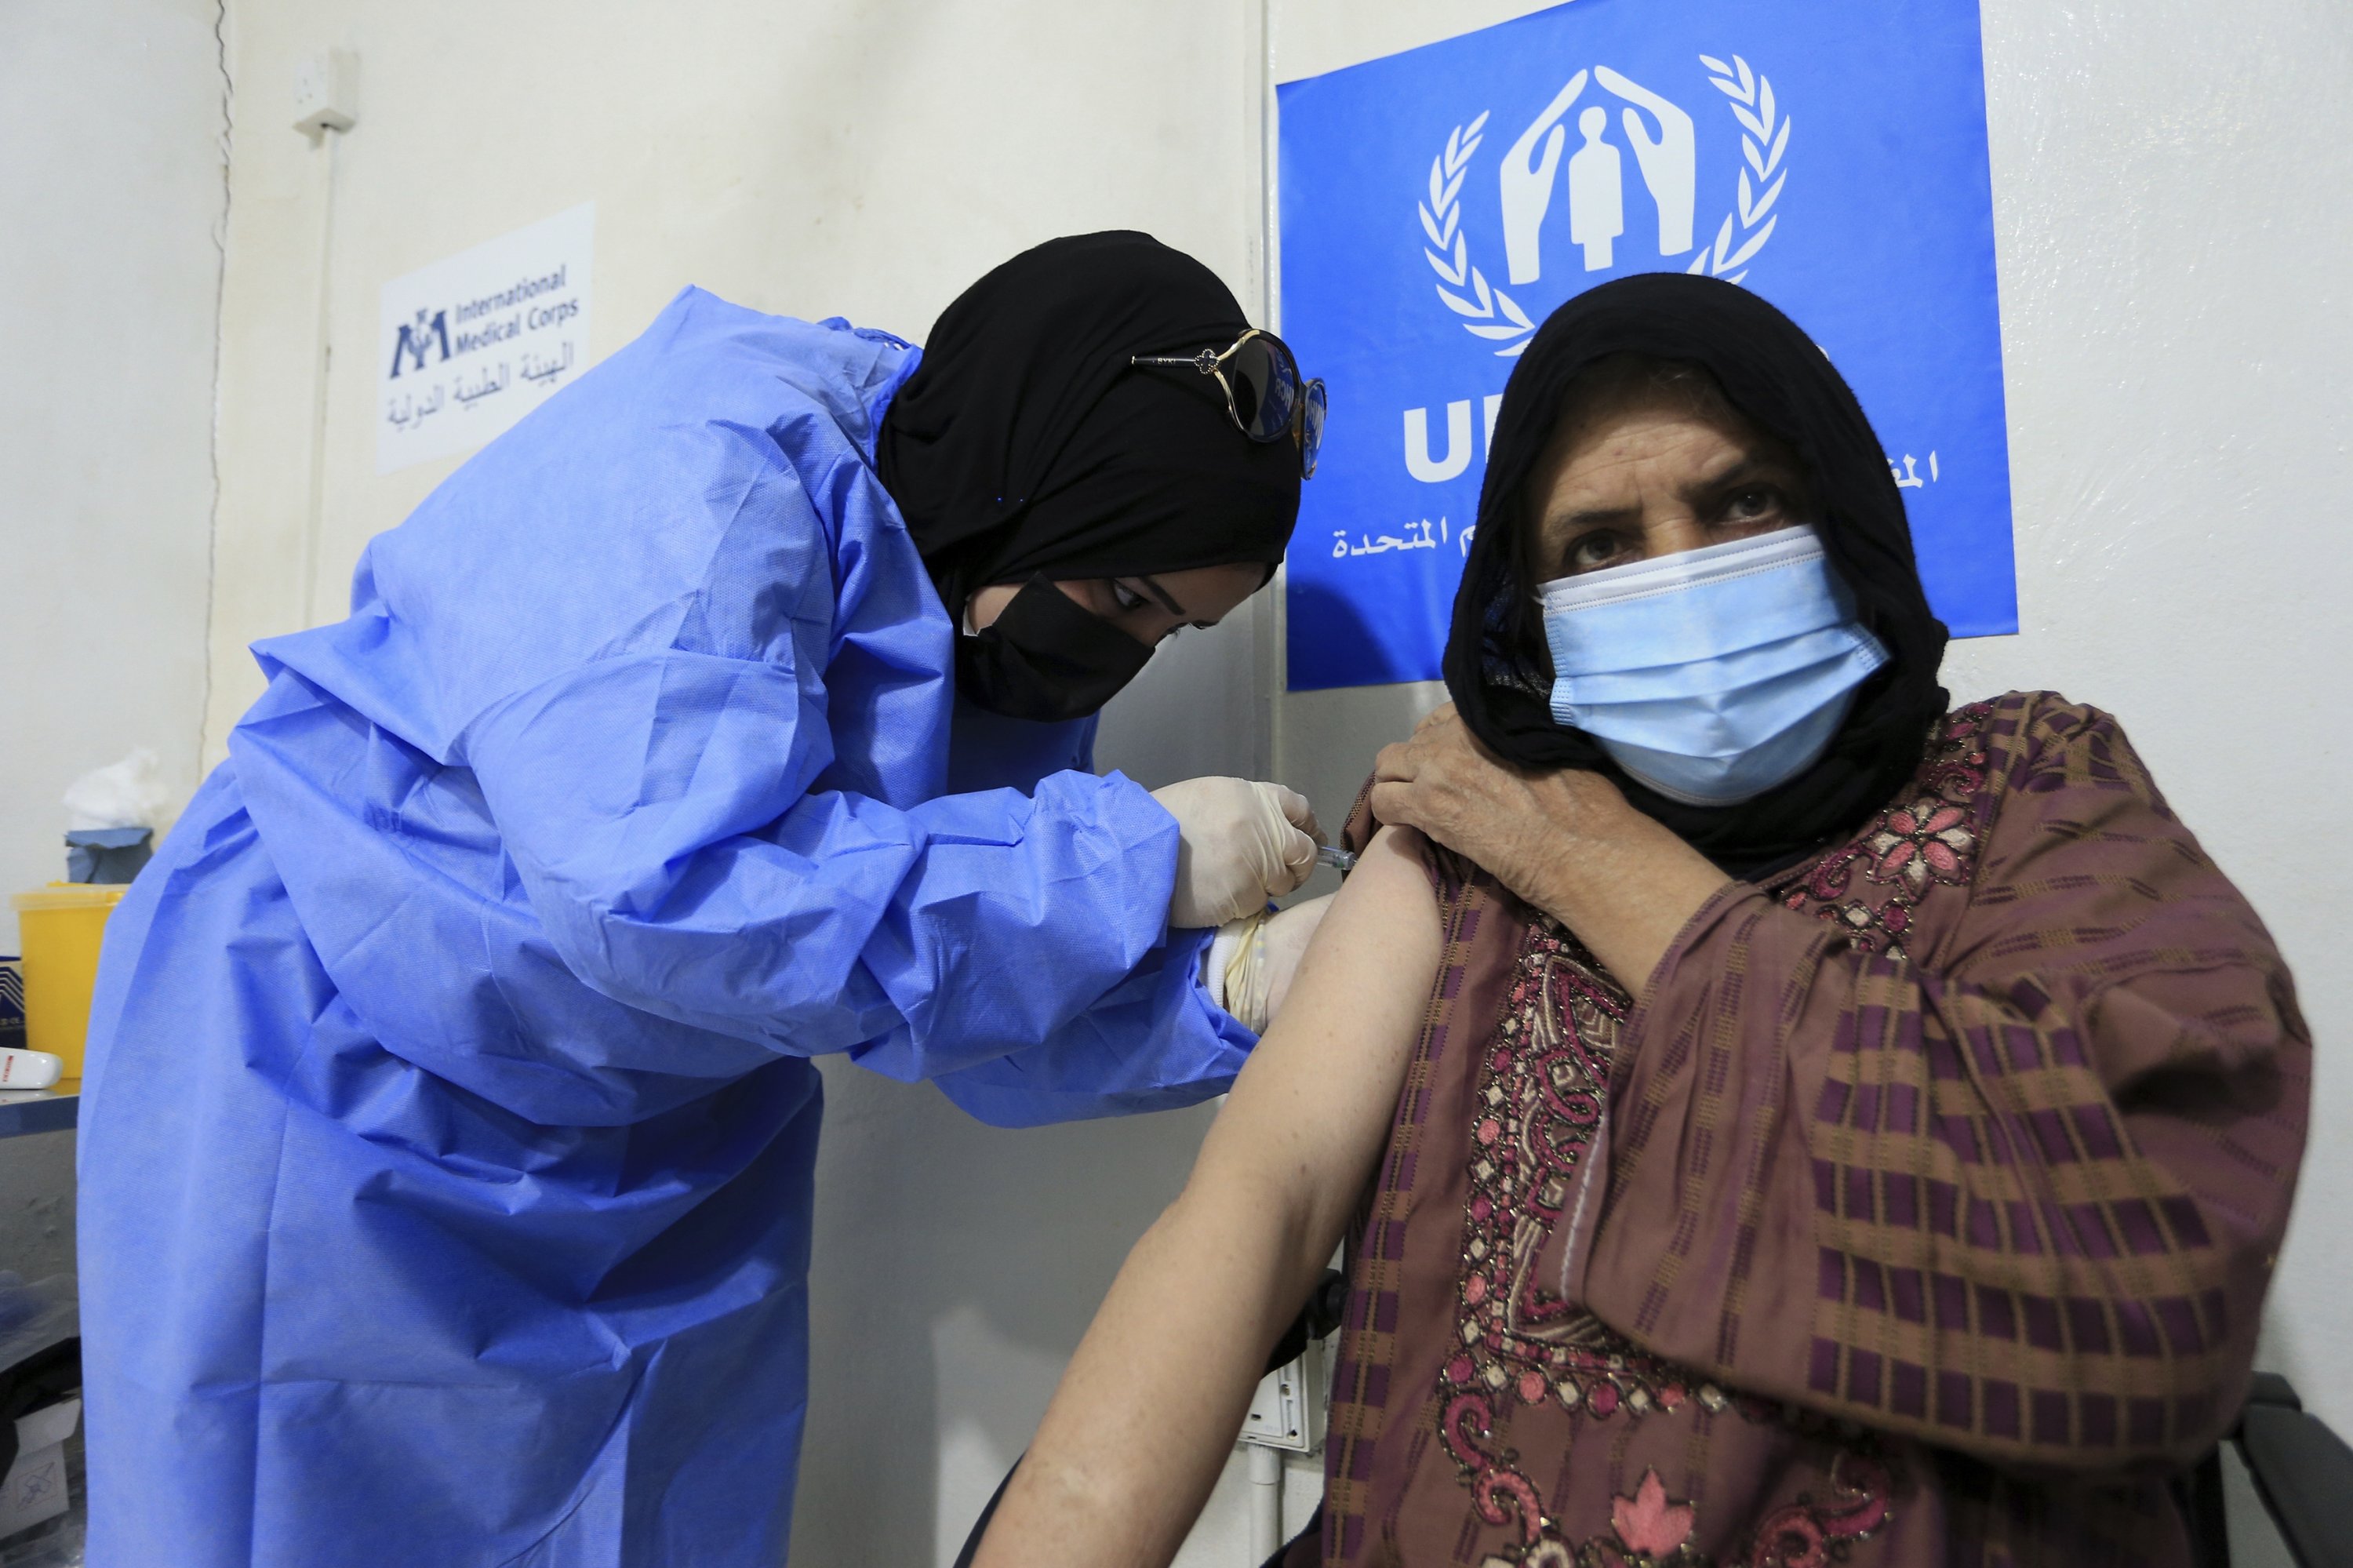 A Syrian refugee receives the Chinese-made Sinopharm COVID-19 vaccine at a medical center in the Zaatari refugee camp, in Mafraq, about 80 kilometers (50 miles) north of the capital Amman, Jordan, Feb. 15, 2021. (AP Photo/Raad Adayleh)